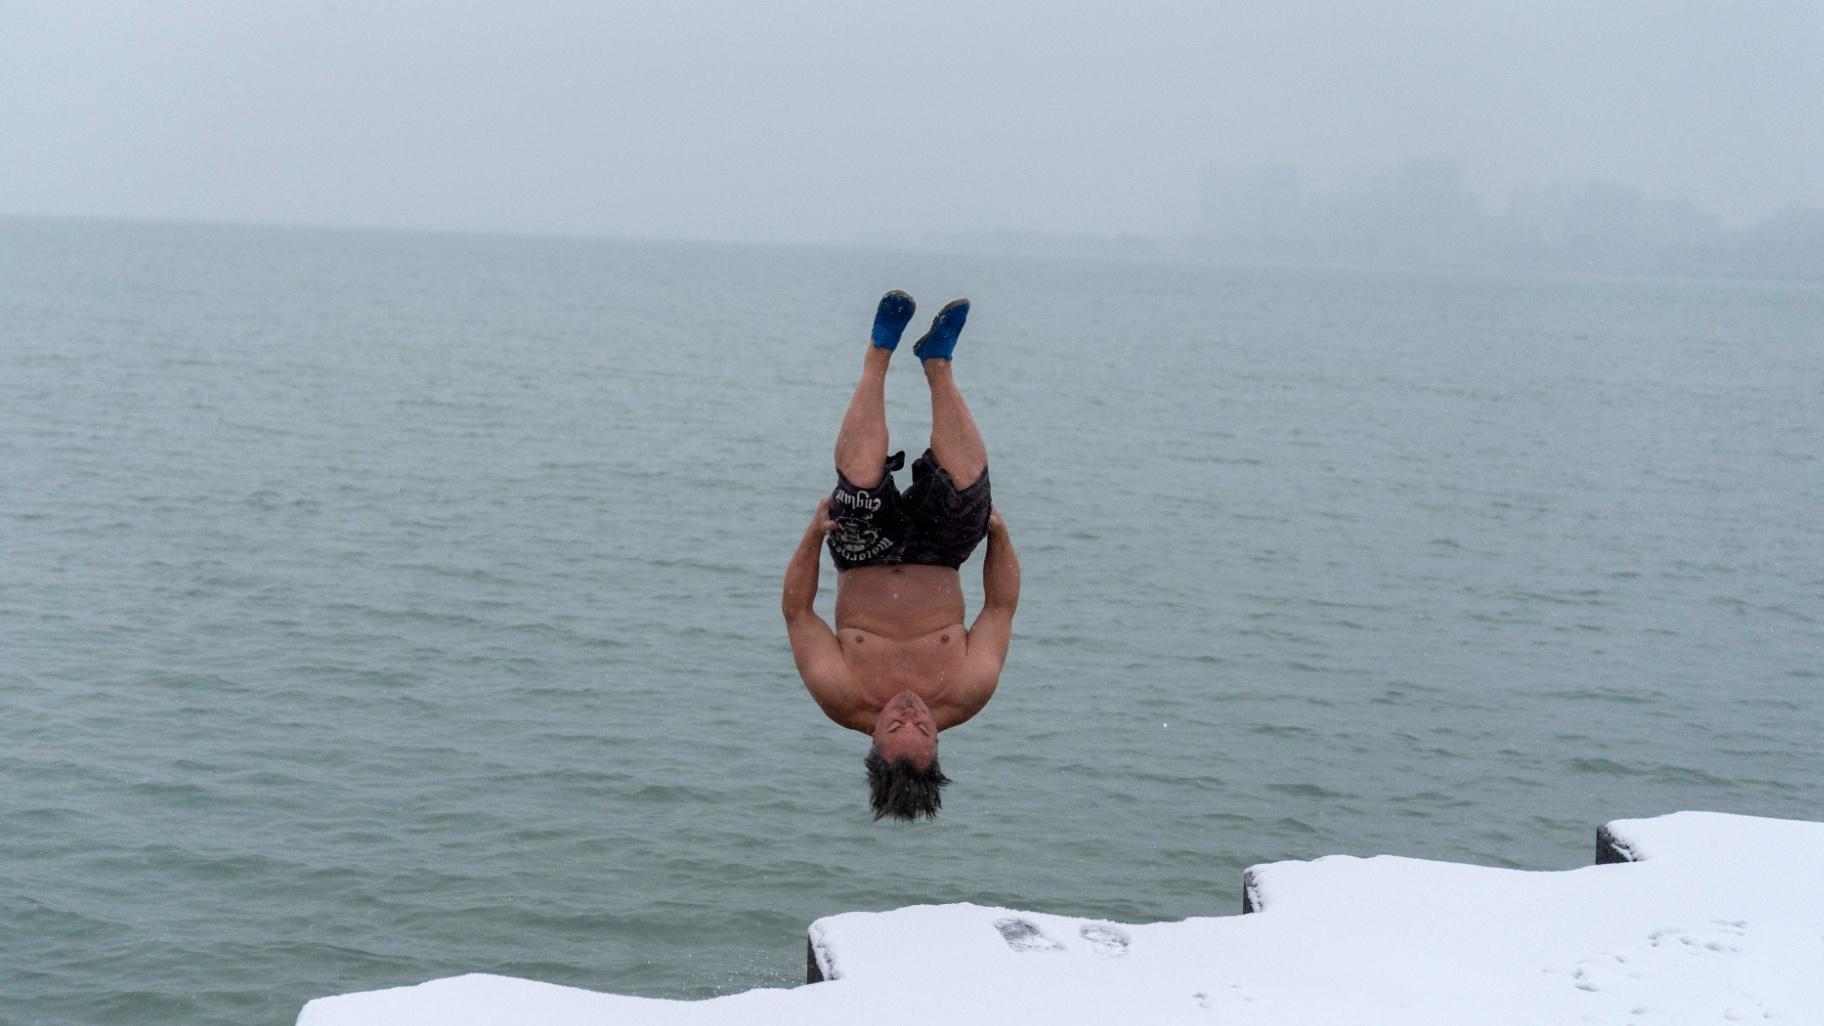 “The Great Lake Jumper” Dan O’Conor takes a plunge into the frigid waters of Lake Michigan, as he does every morning, Thursday, Jan. 26, 2023, in Chicago. O’Conor has jumped every day since June 2020. (AP Photo / Erin Hooley)